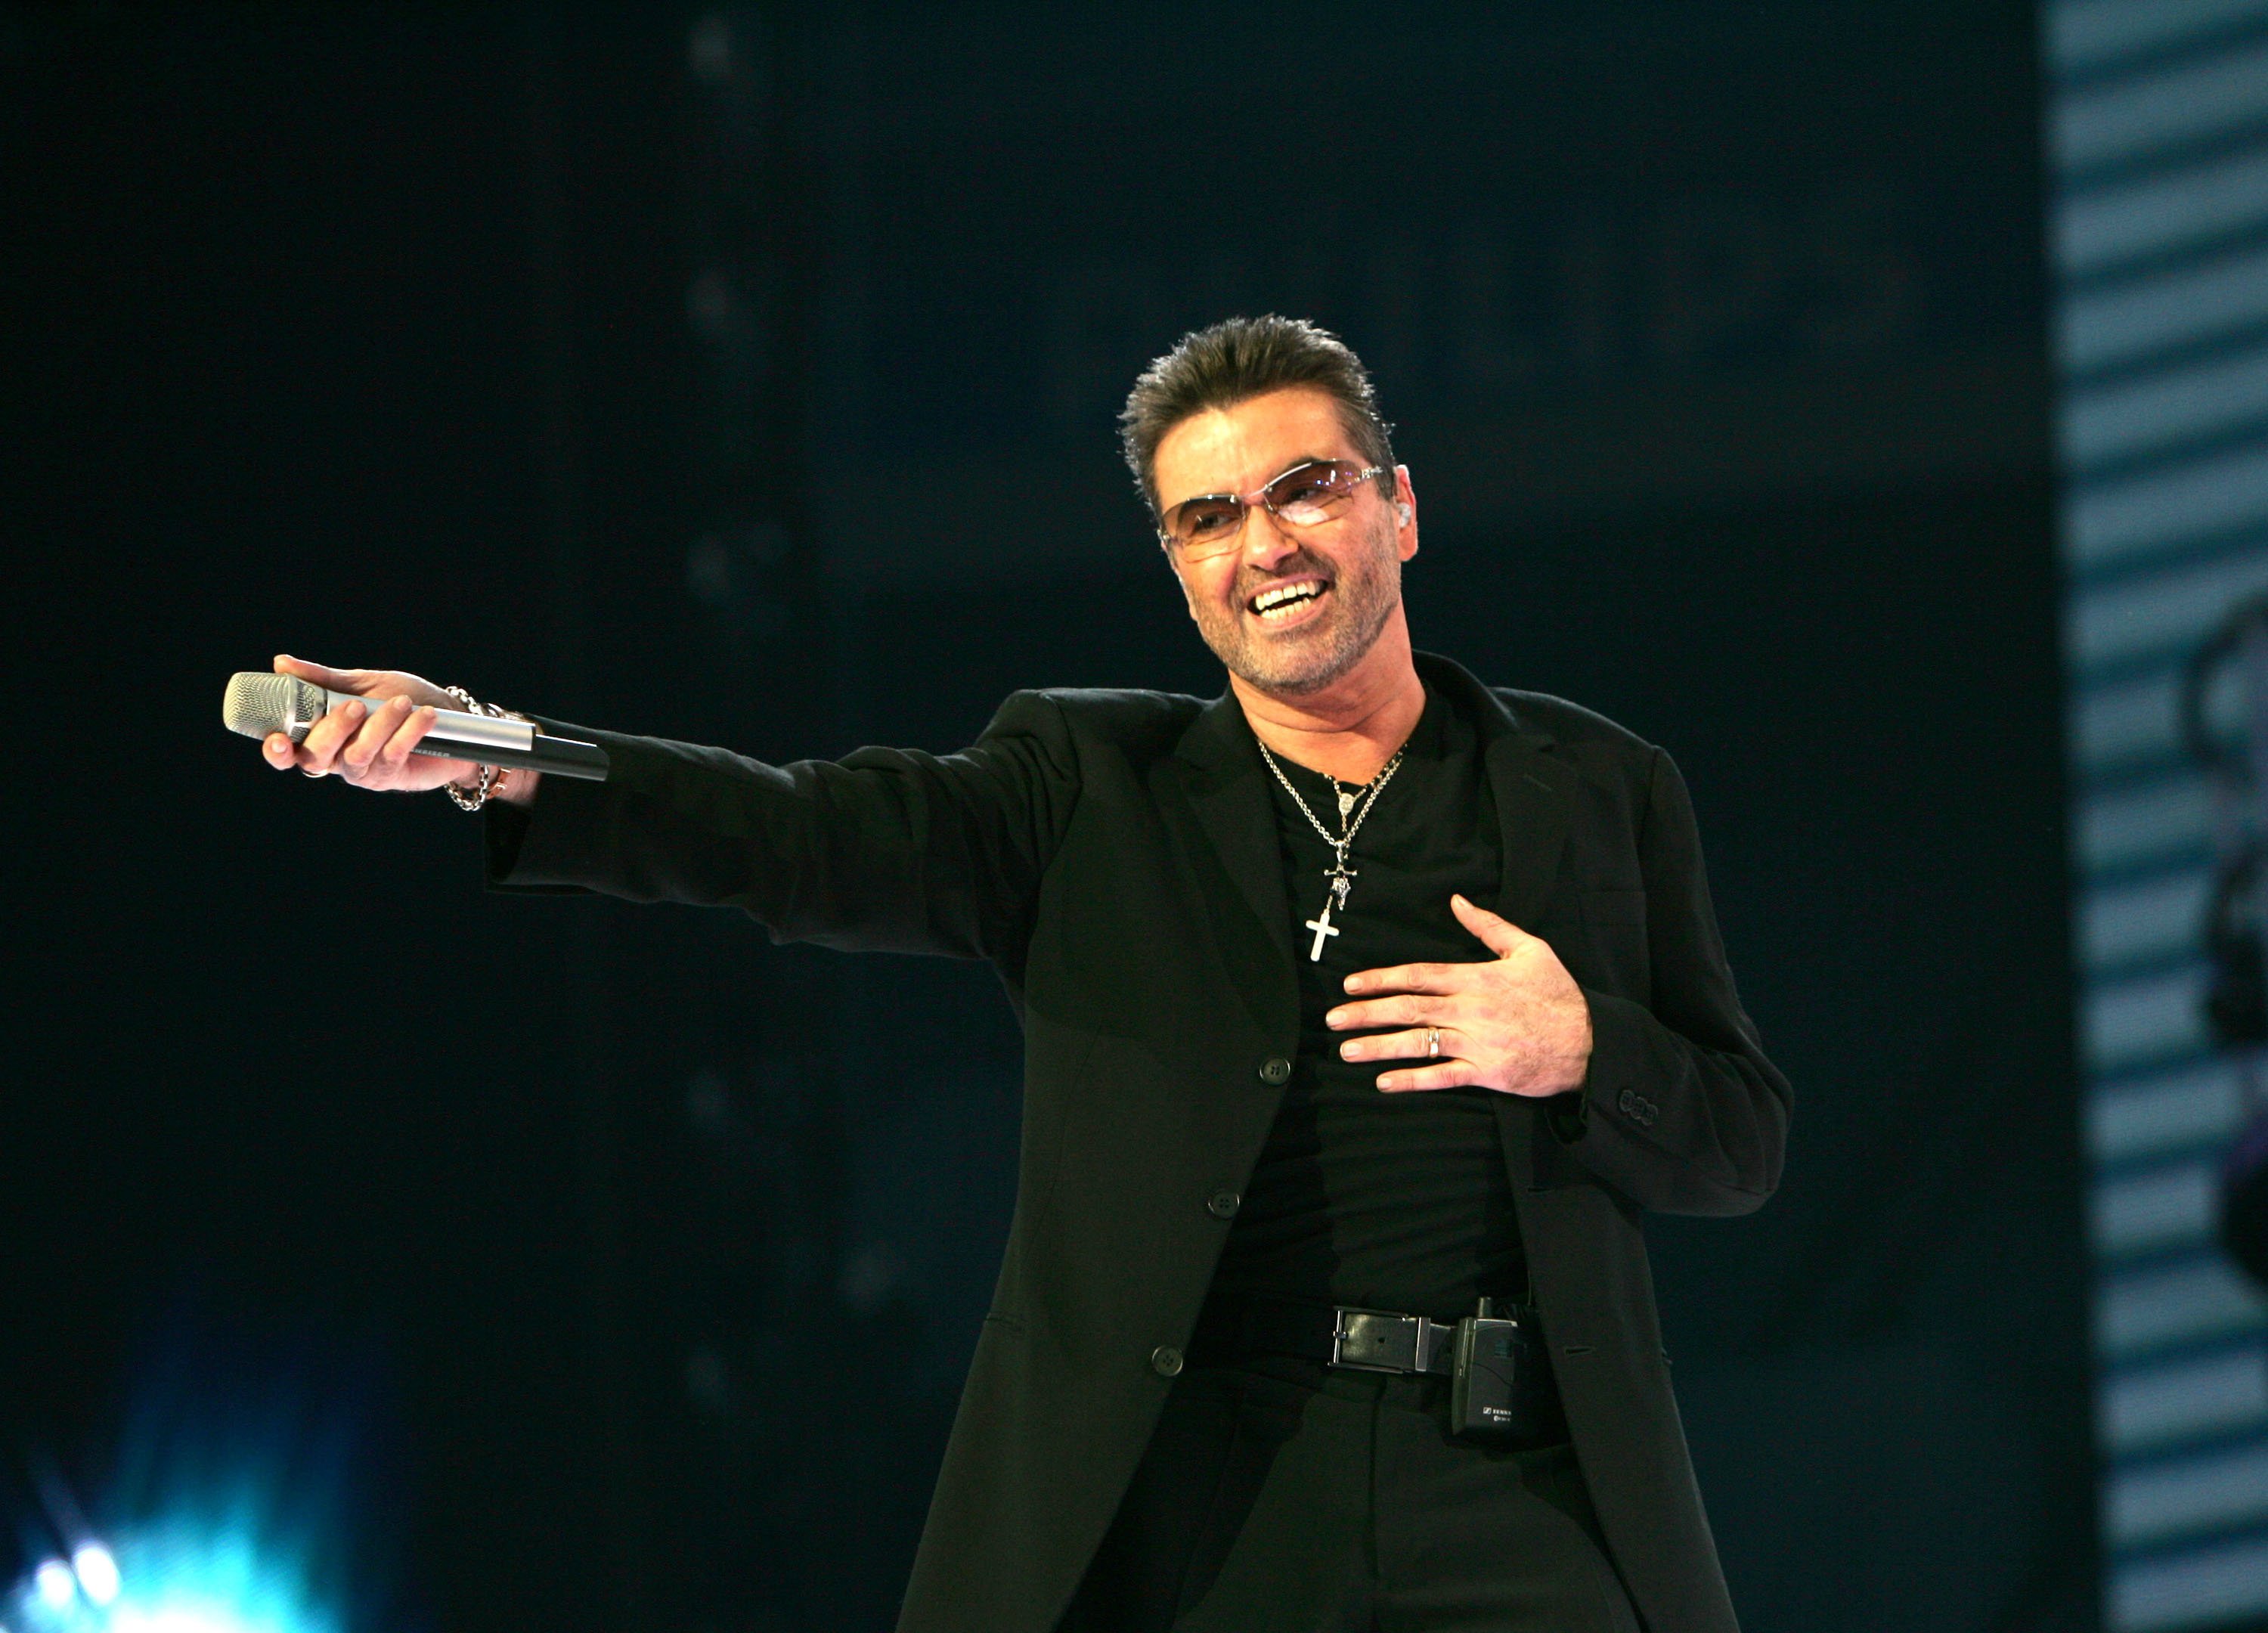 'George Michael In Concert' at The Arena in Amsterdam